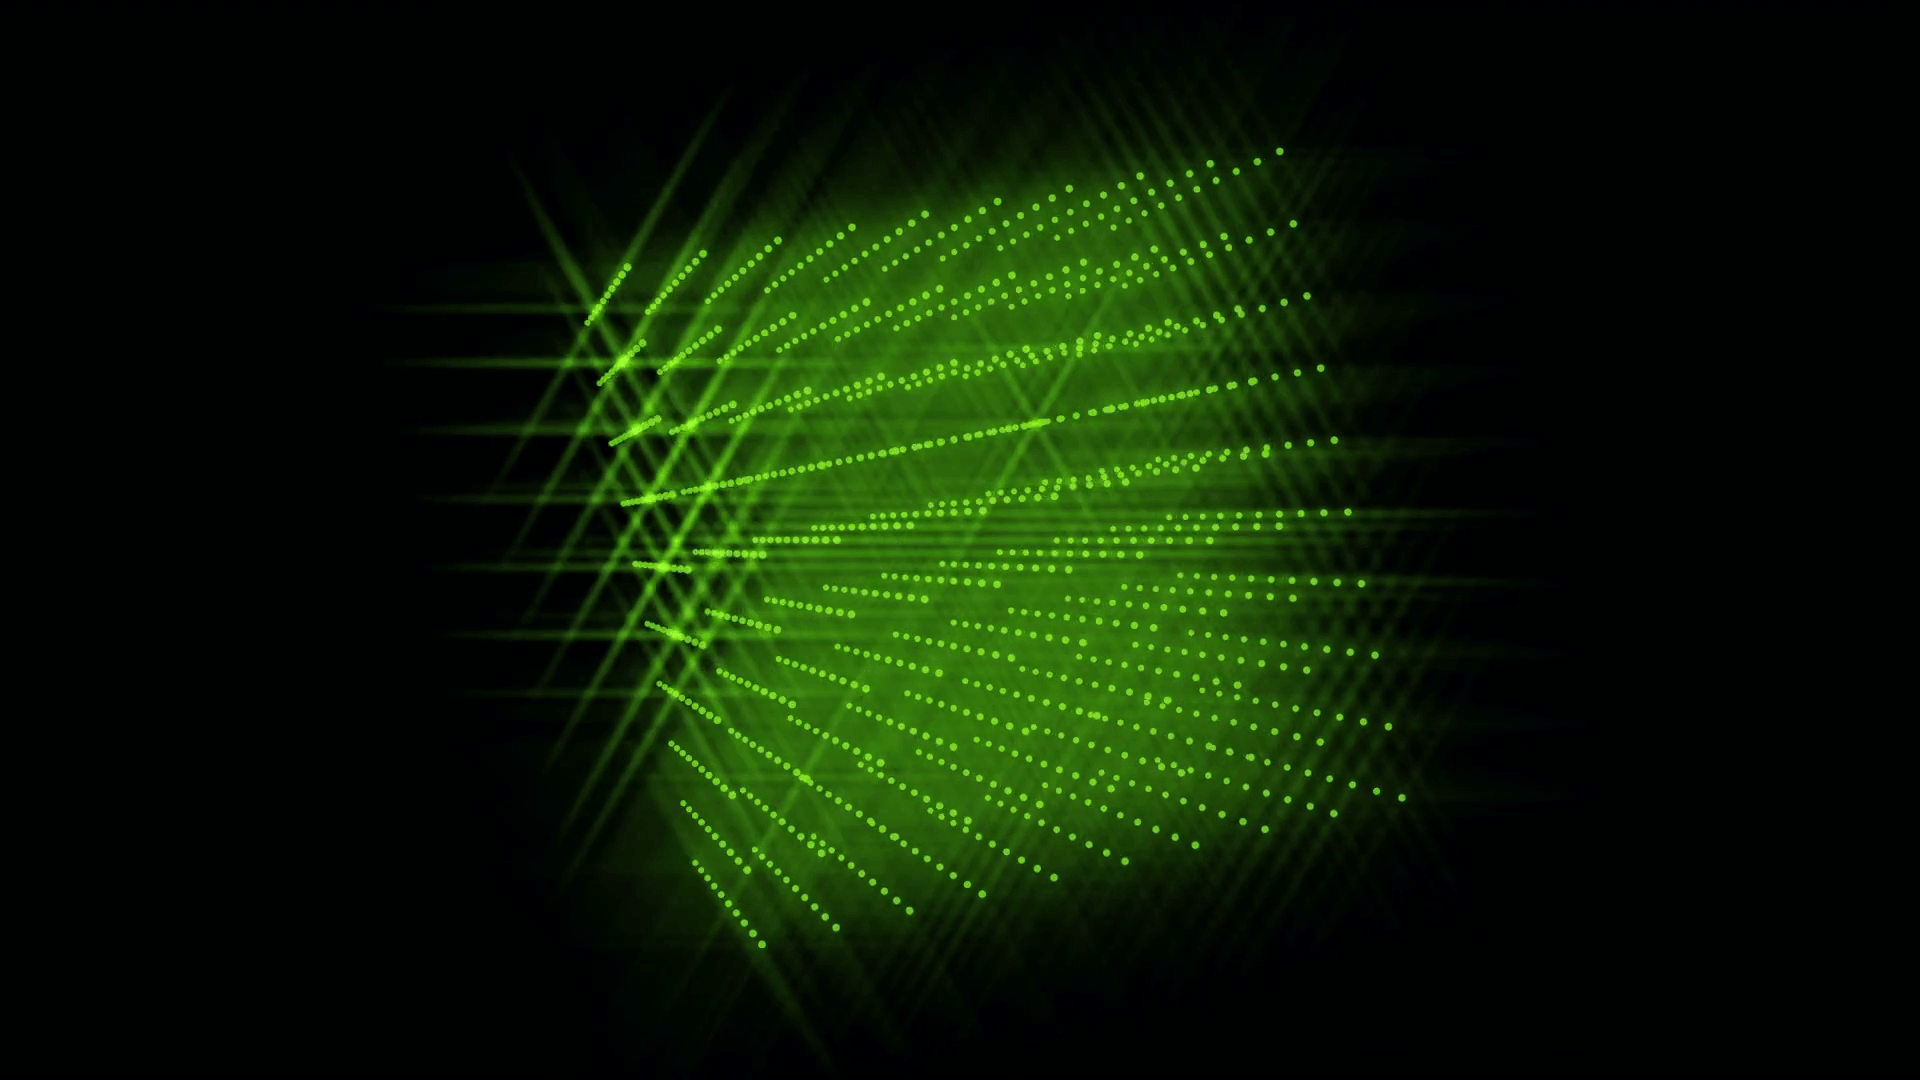 3D cube of green glowing particles rotating on a diagonal on a